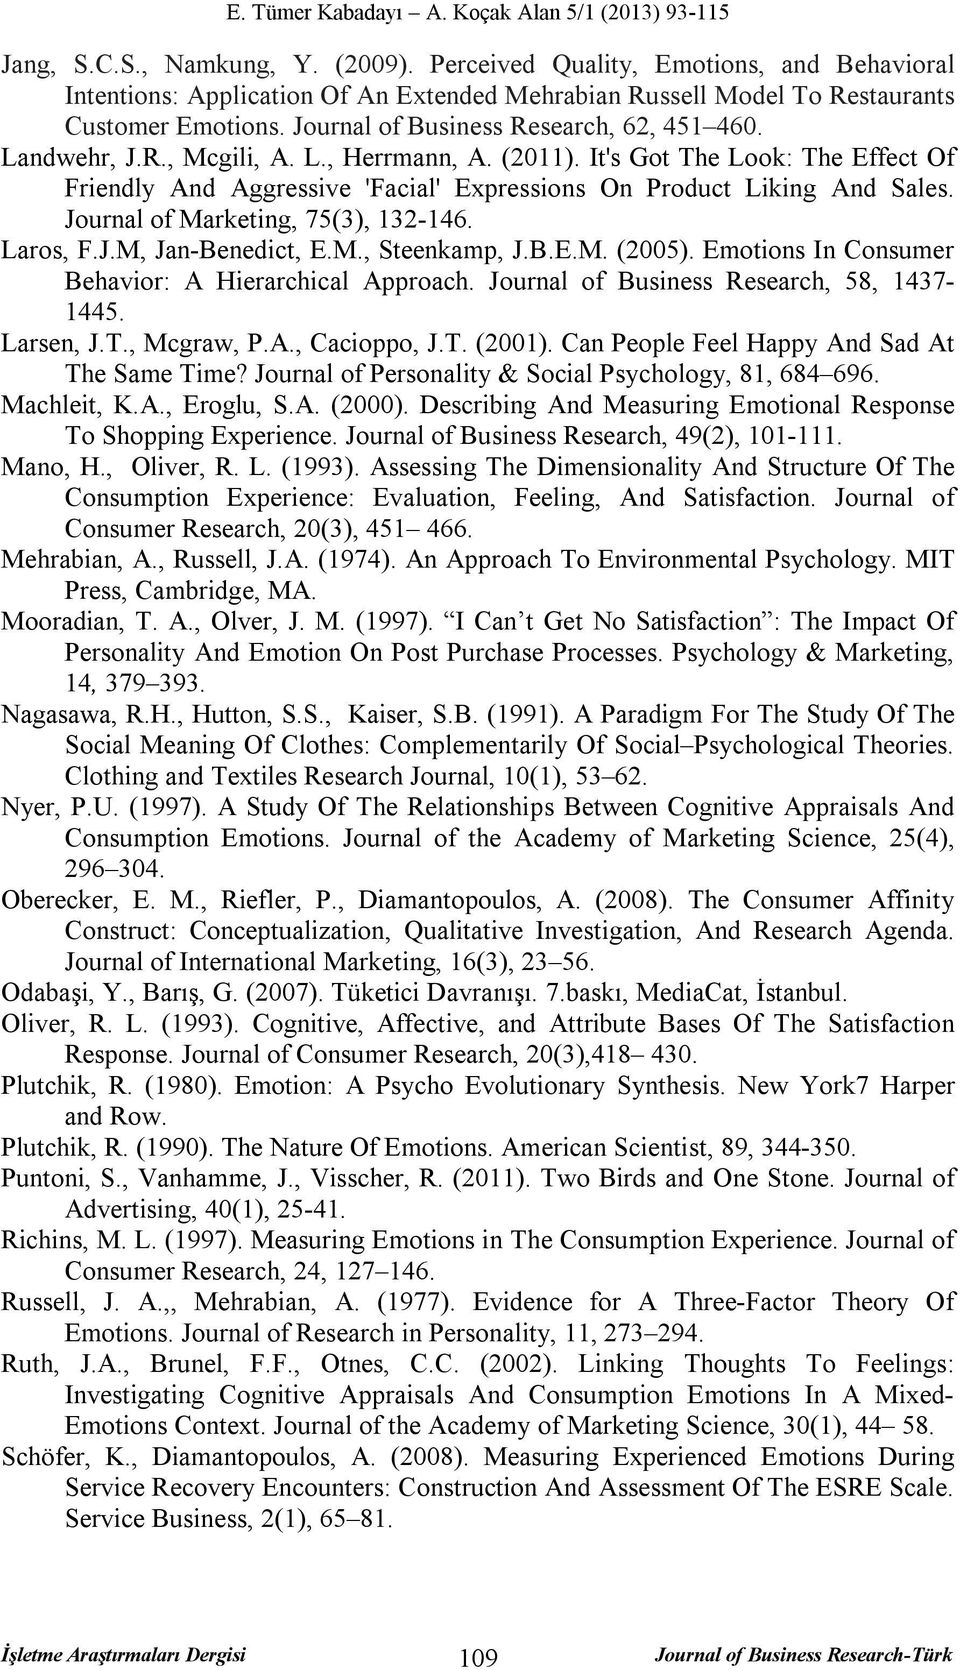 It's Got The Look: The Effect Of Friendly And Aggressive 'Facial' Expressions On Product Liking And Sales. Journal of Marketing, 75(3), 132-146. Laros, F.J.M, Jan-Benedict, E.M., Steenkamp, J.B.E.M. (2005).